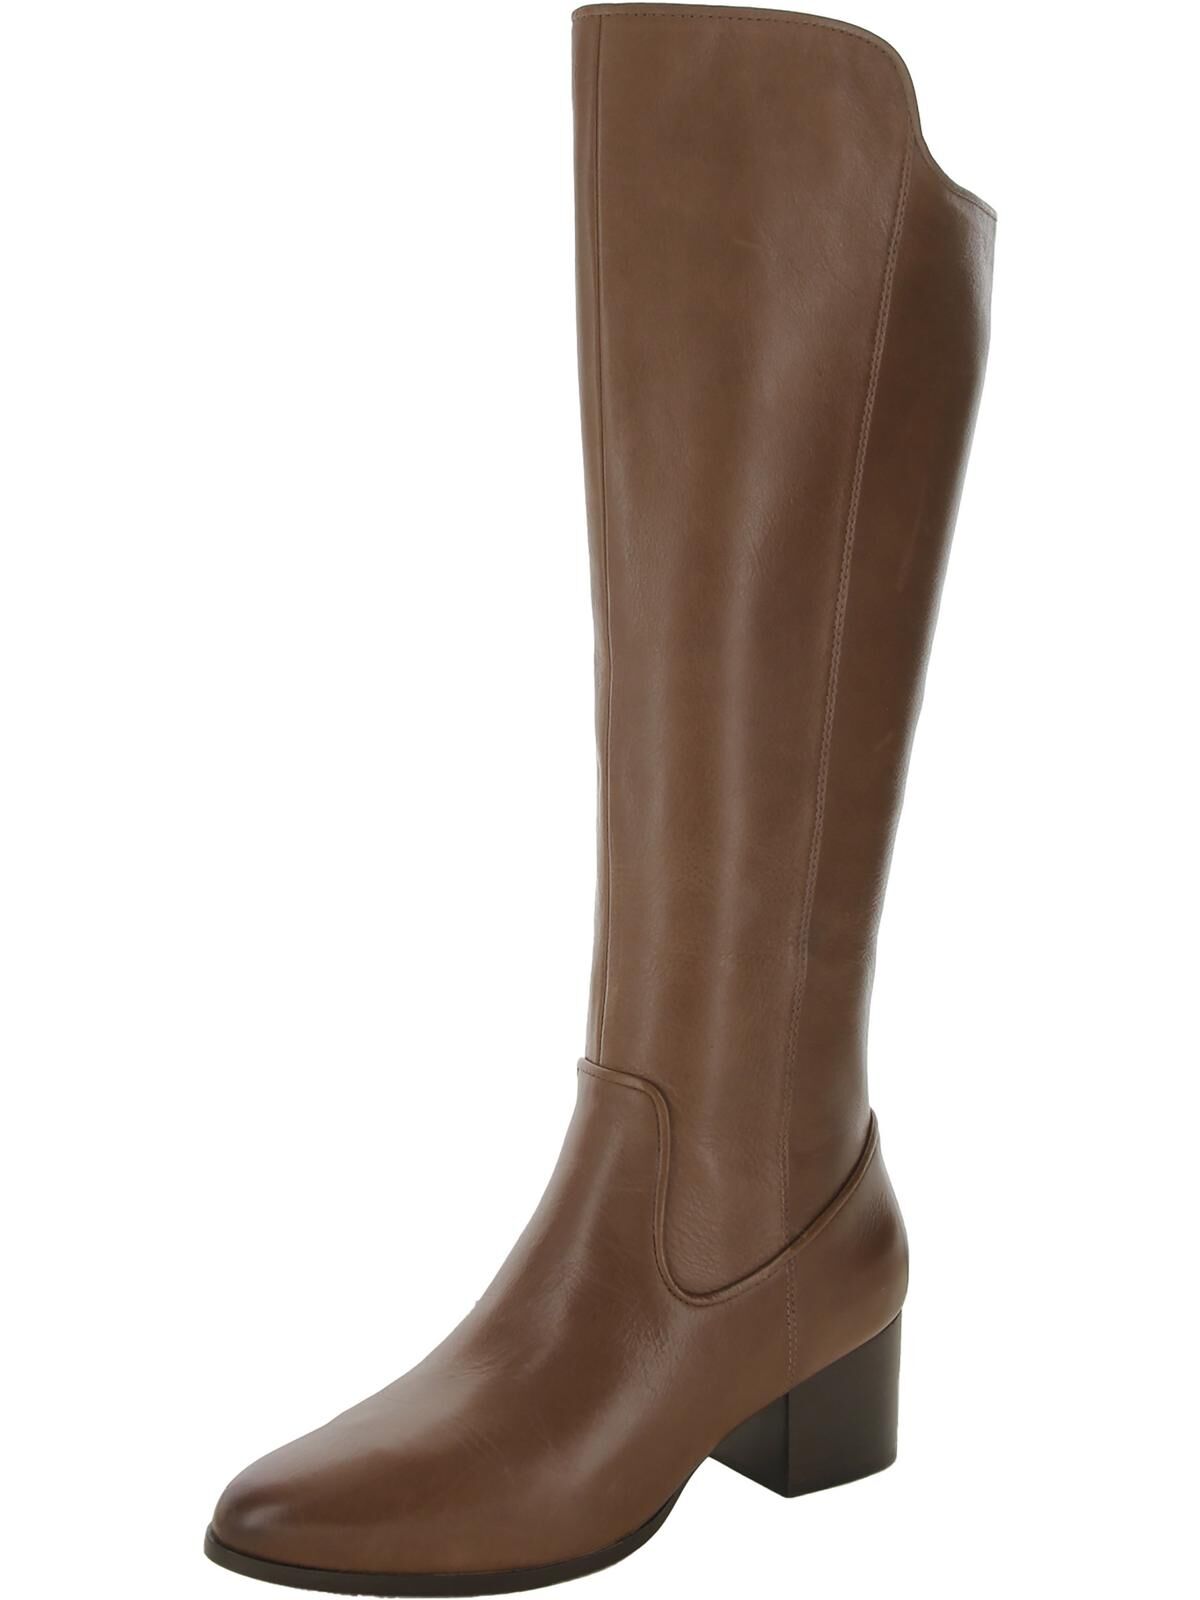 Johnston & Murphy TRISTA Womens Leather Heel Synthetic outsole Thigh-High Boots US 8.5 female